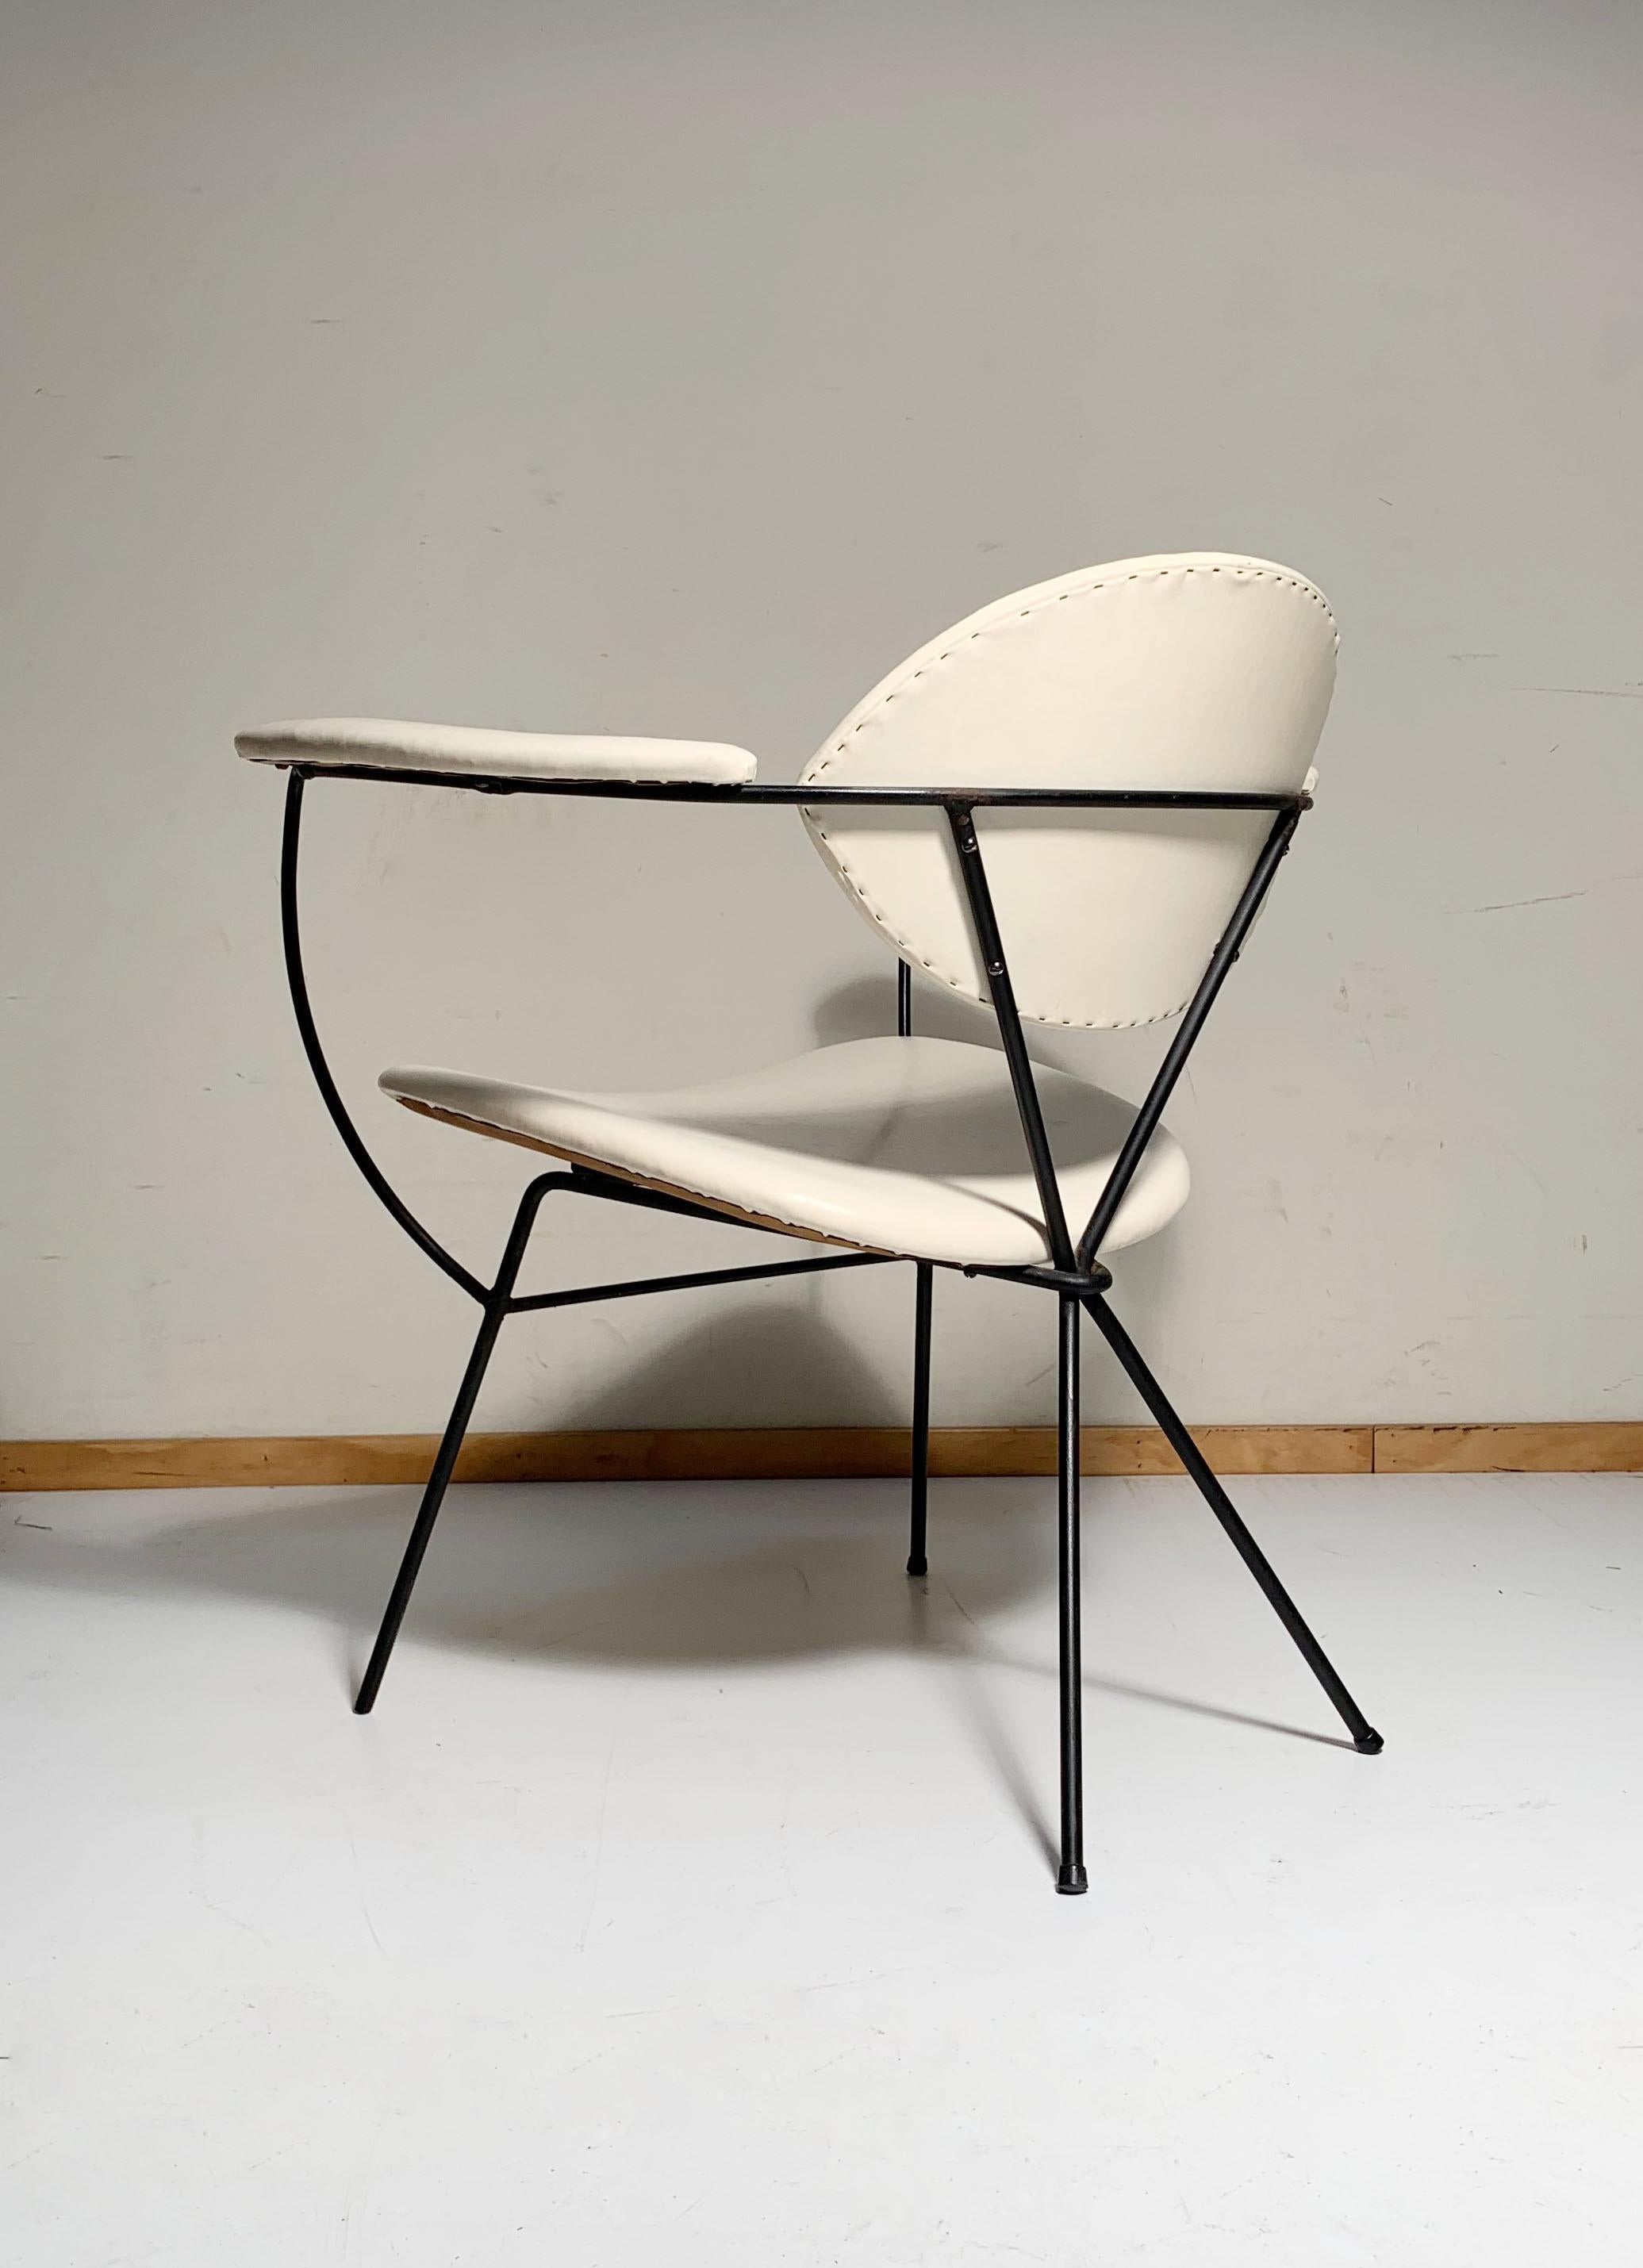 Vintage Mid-Century Modern Lounge Chair byJoseph Cicchelli for Reilly Wolf

In the manner of Salterini and Milo Baughman